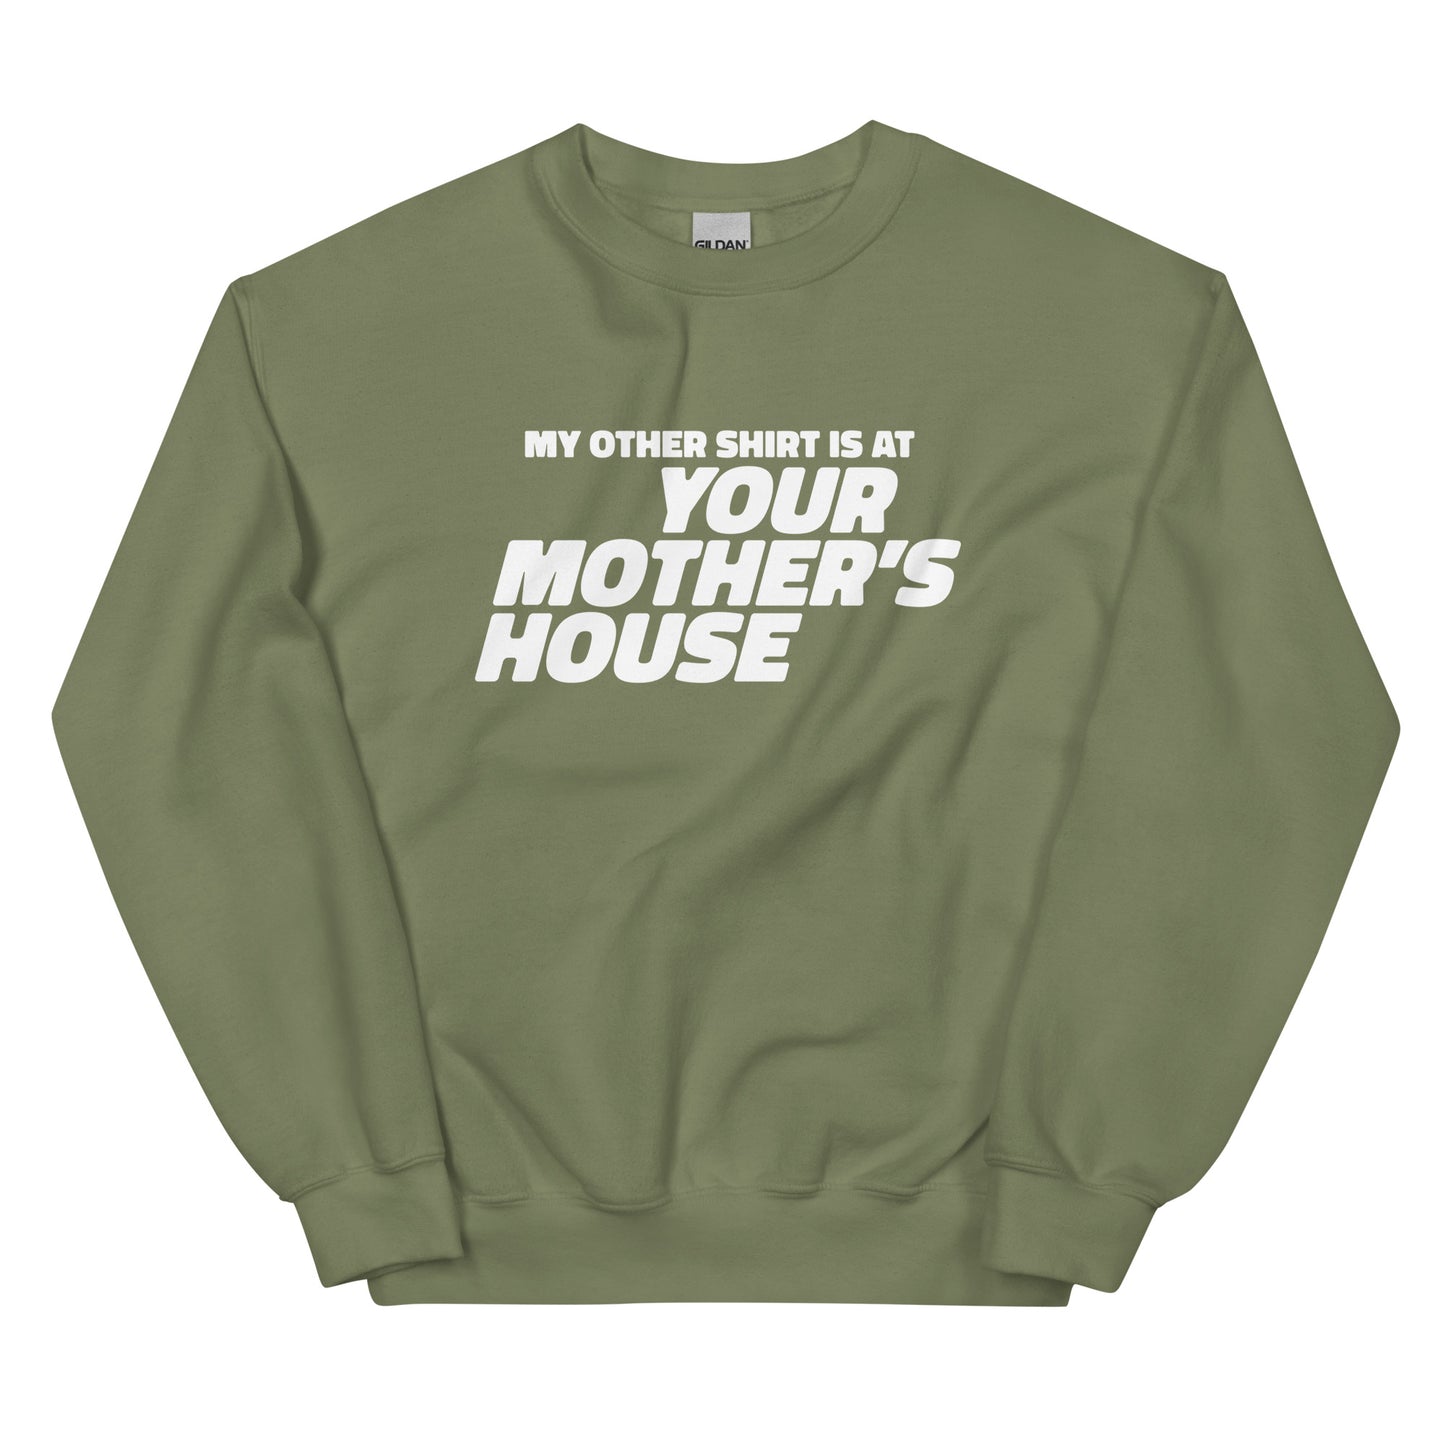 My Other Shirt is at Your Mother's House Unisex Sweatshirt